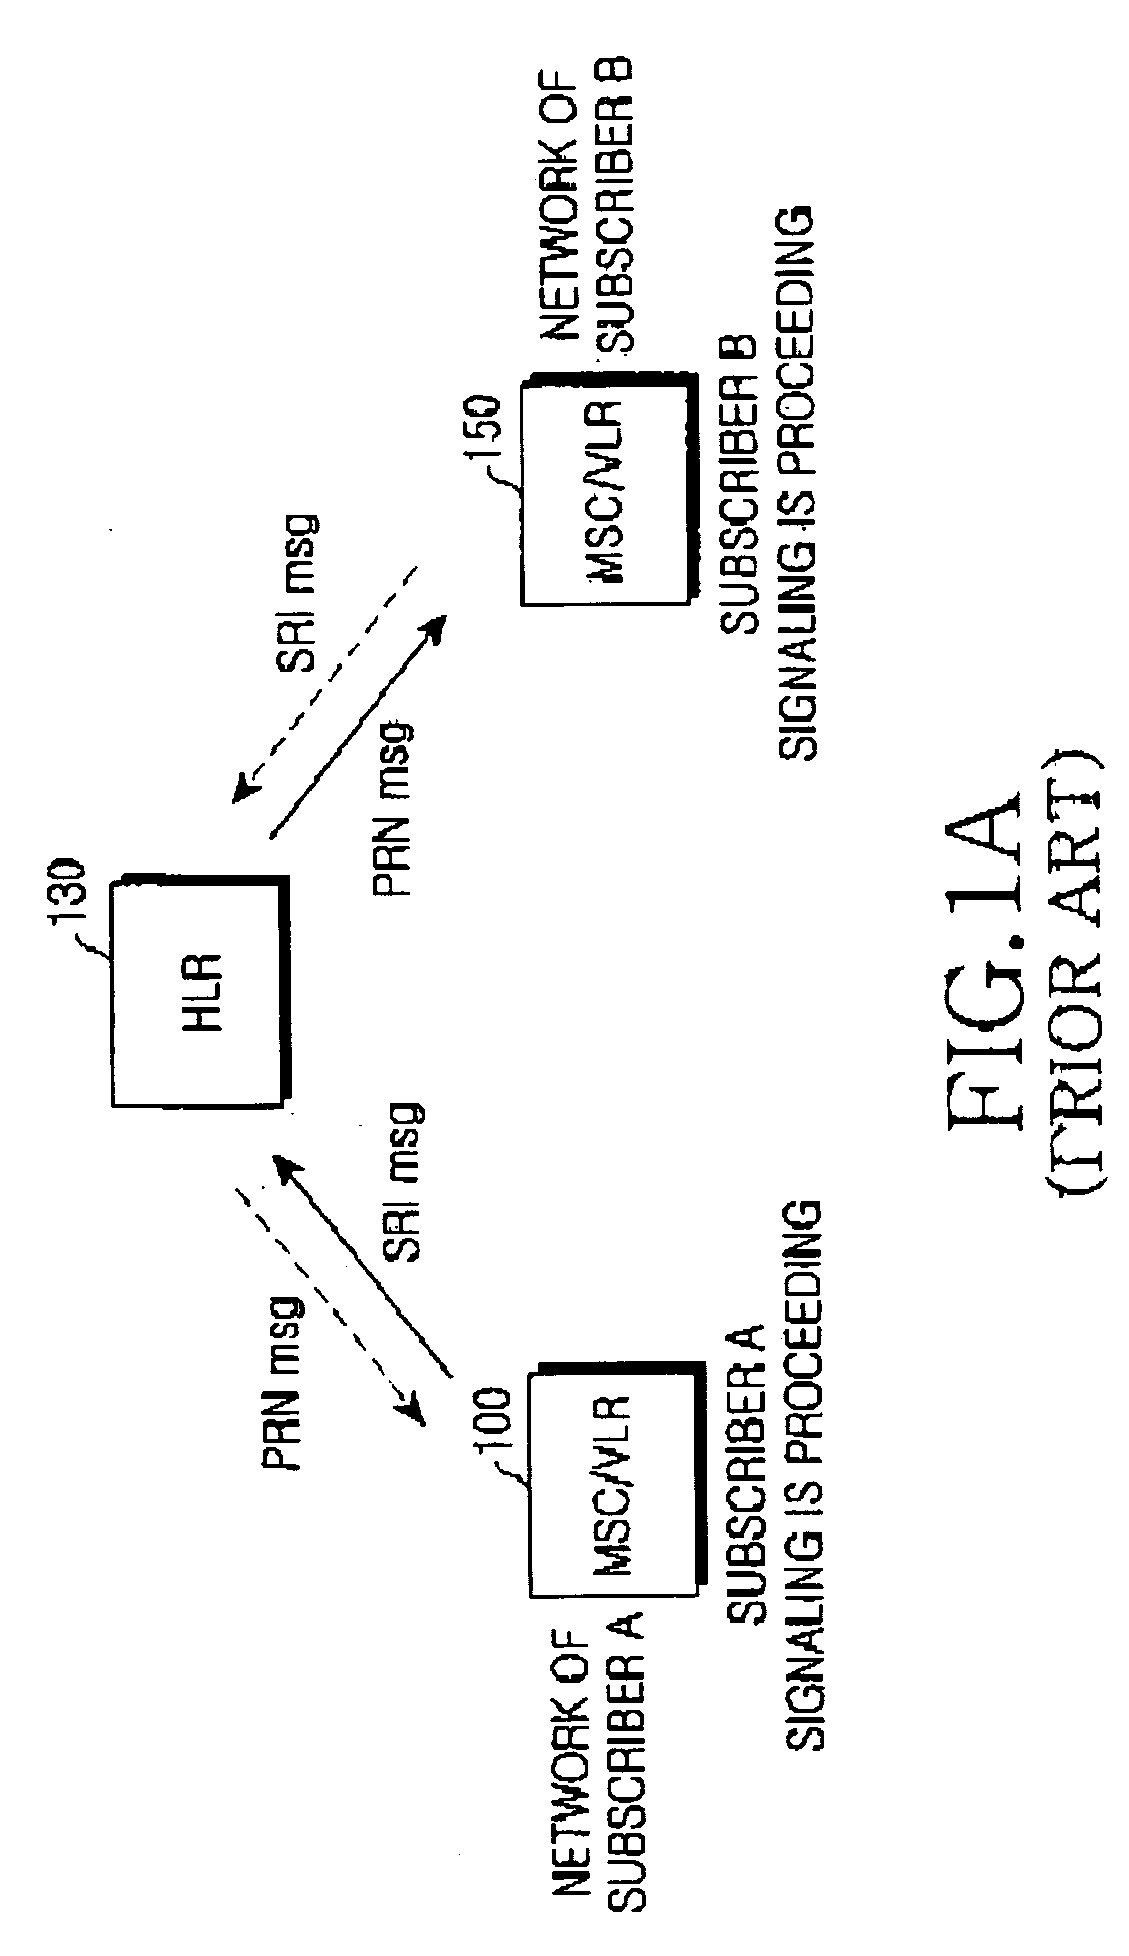 Method for improving communication success rate in simultaneous call trial between subscribers in mobile communication systems